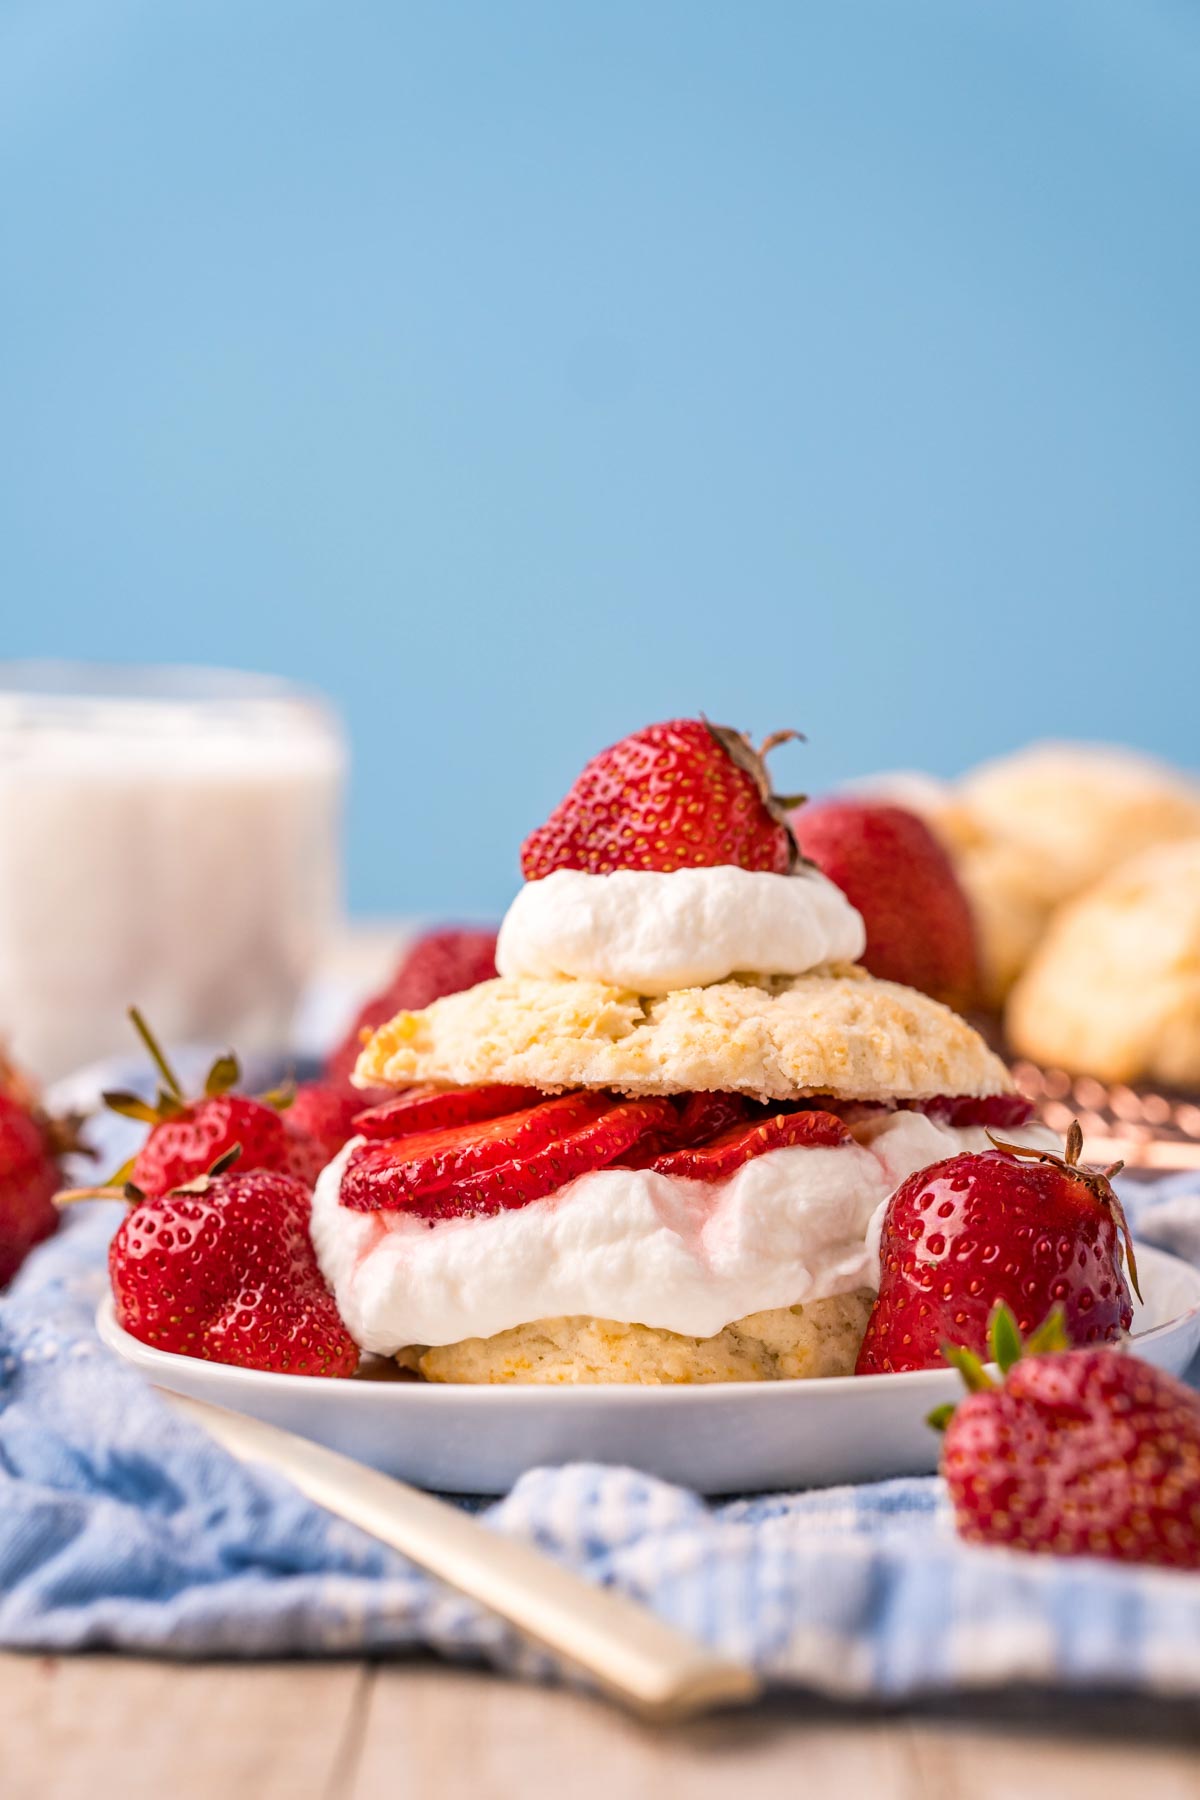 strawberry shortcake on a white plate with a blue napkin